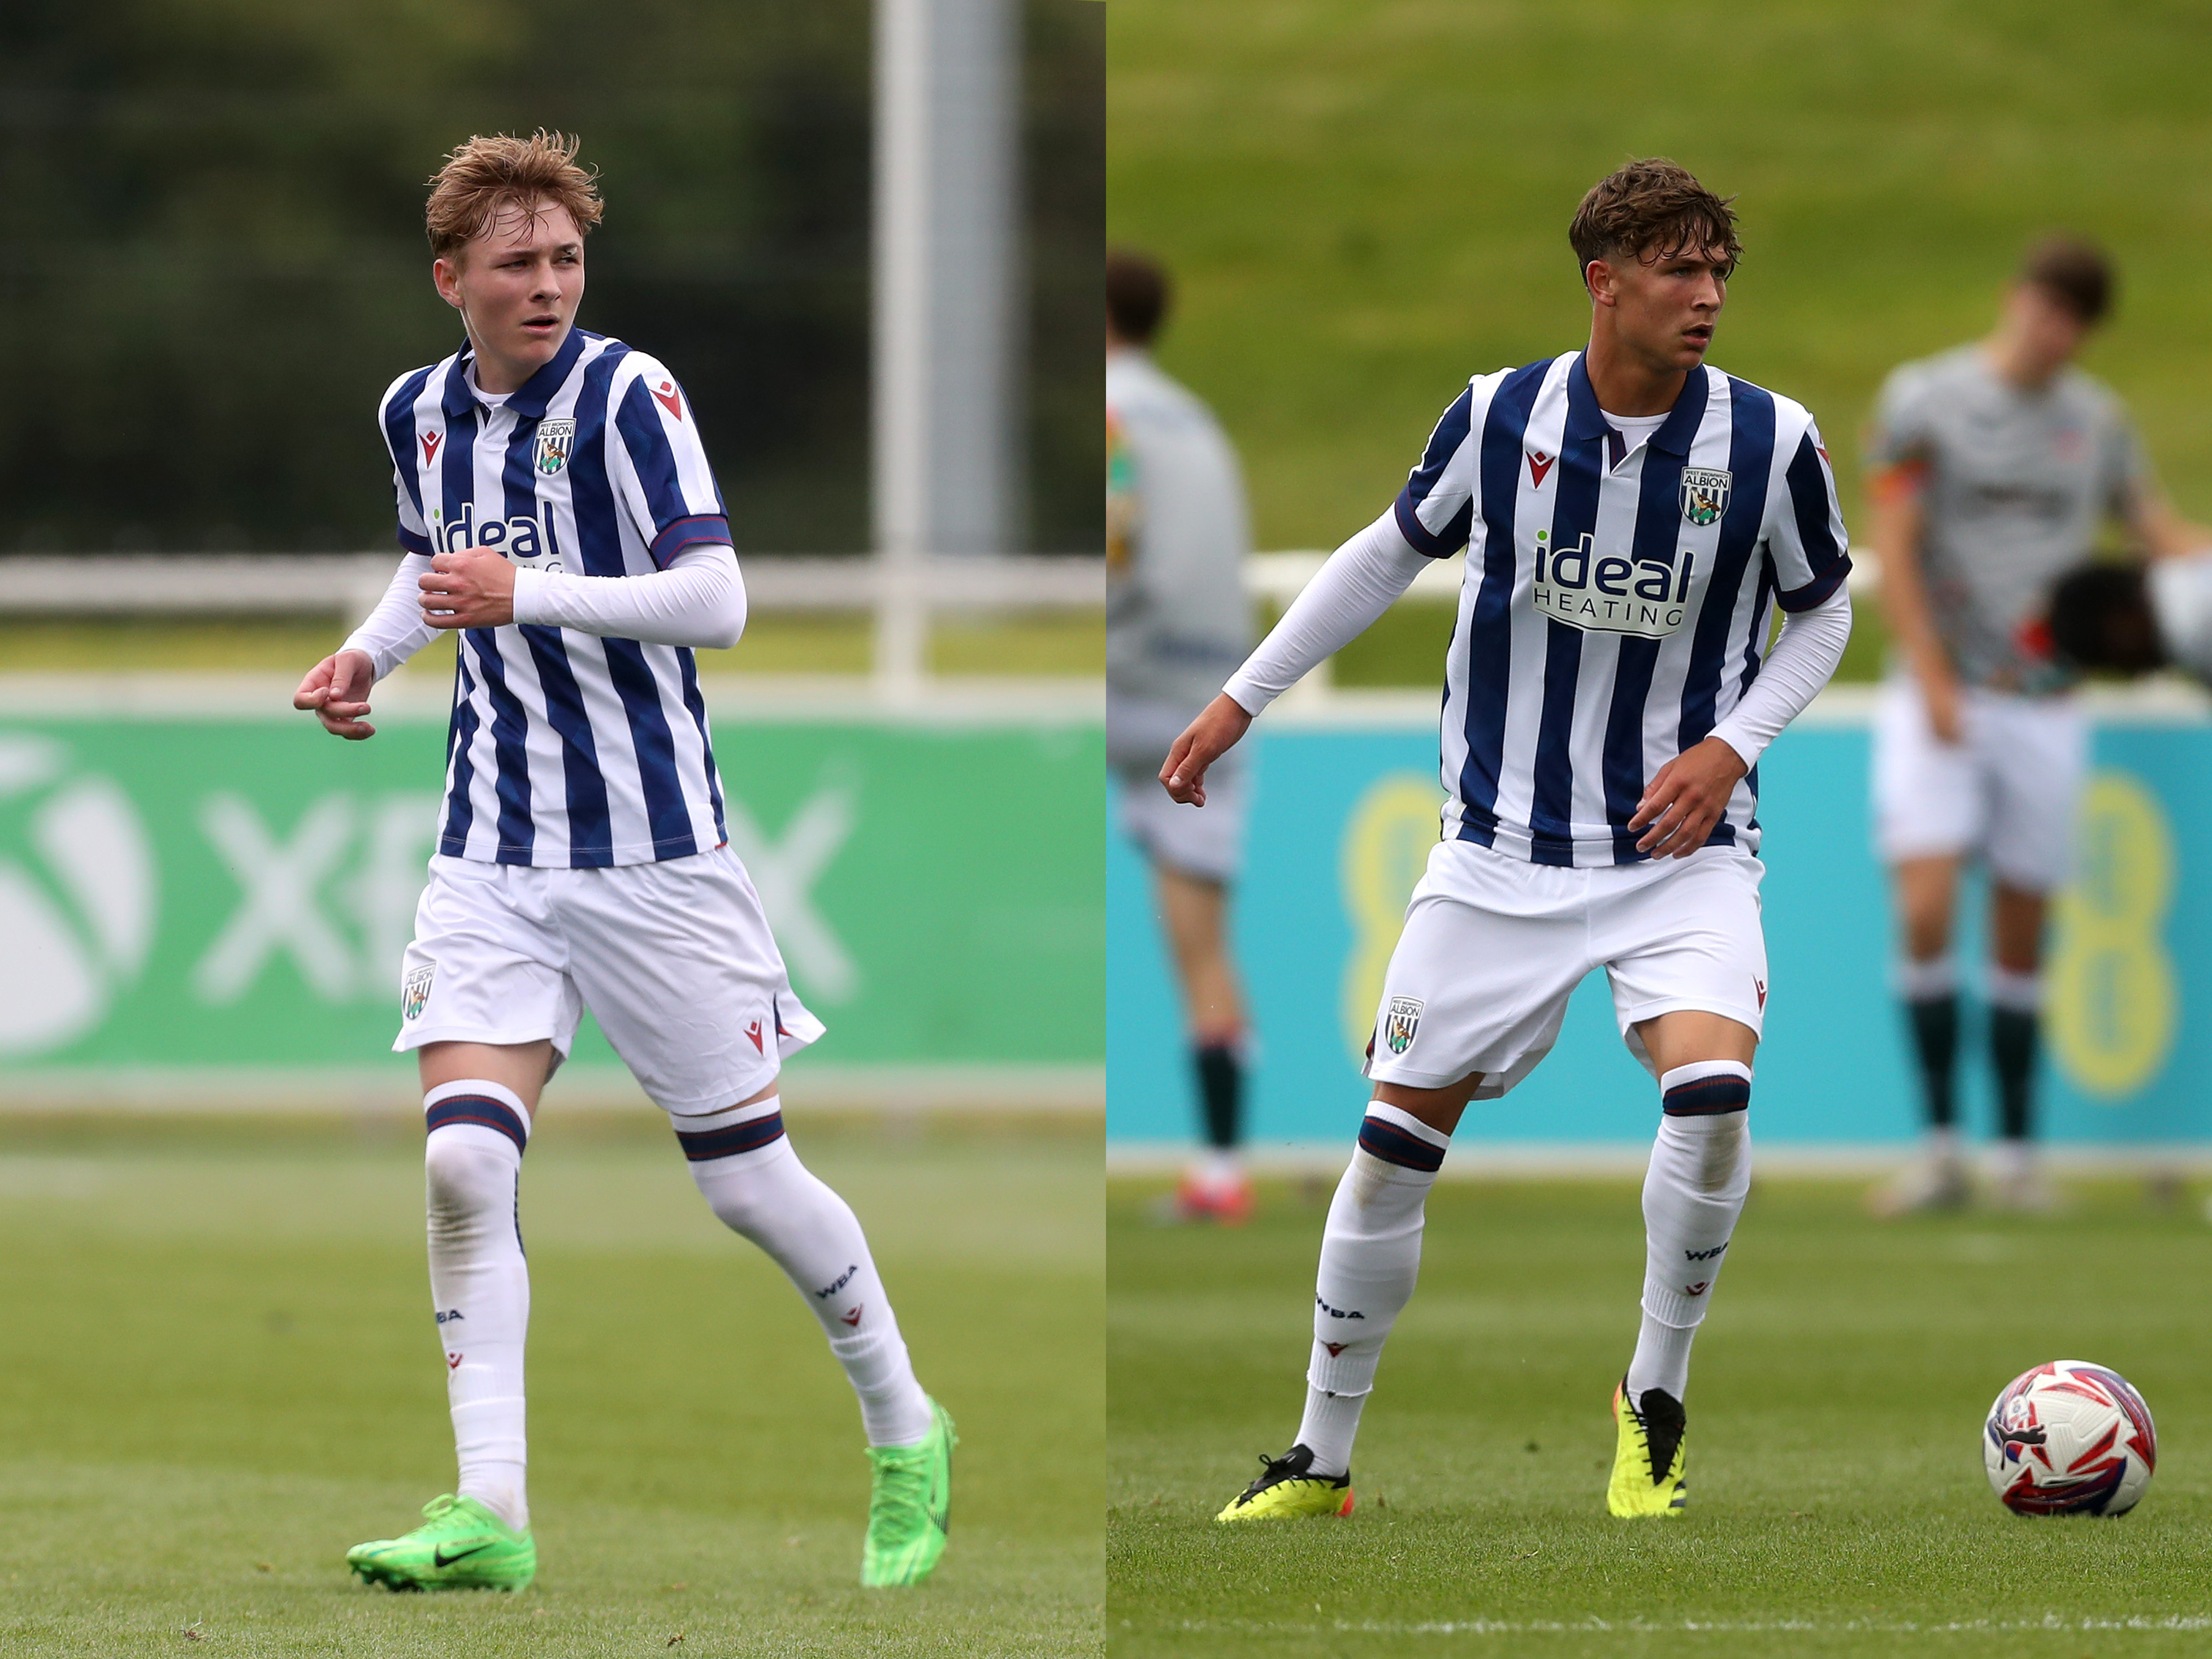 A split image of Ollie Bostock in the home kit on the right and Cole Deeming in the home kit on the left 